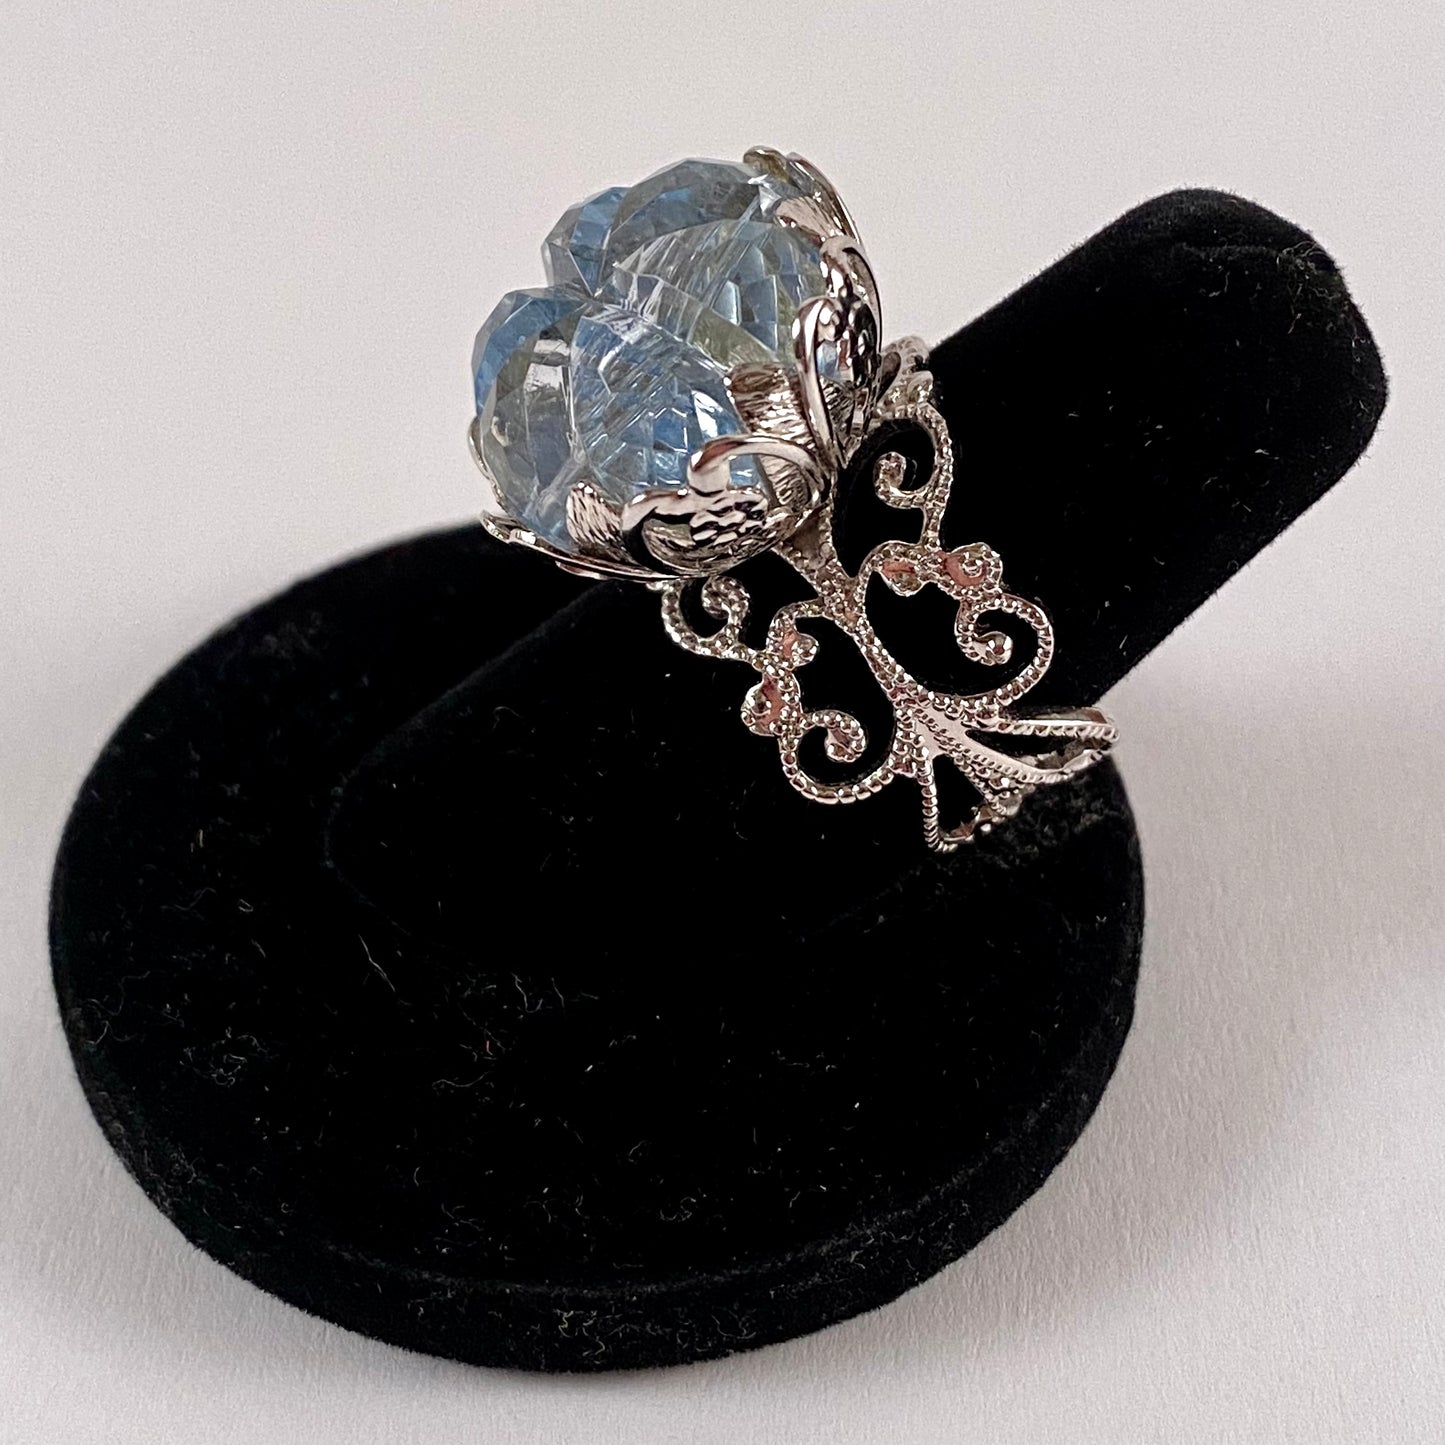 1973 Sarah Coventry Blue Lace Ring